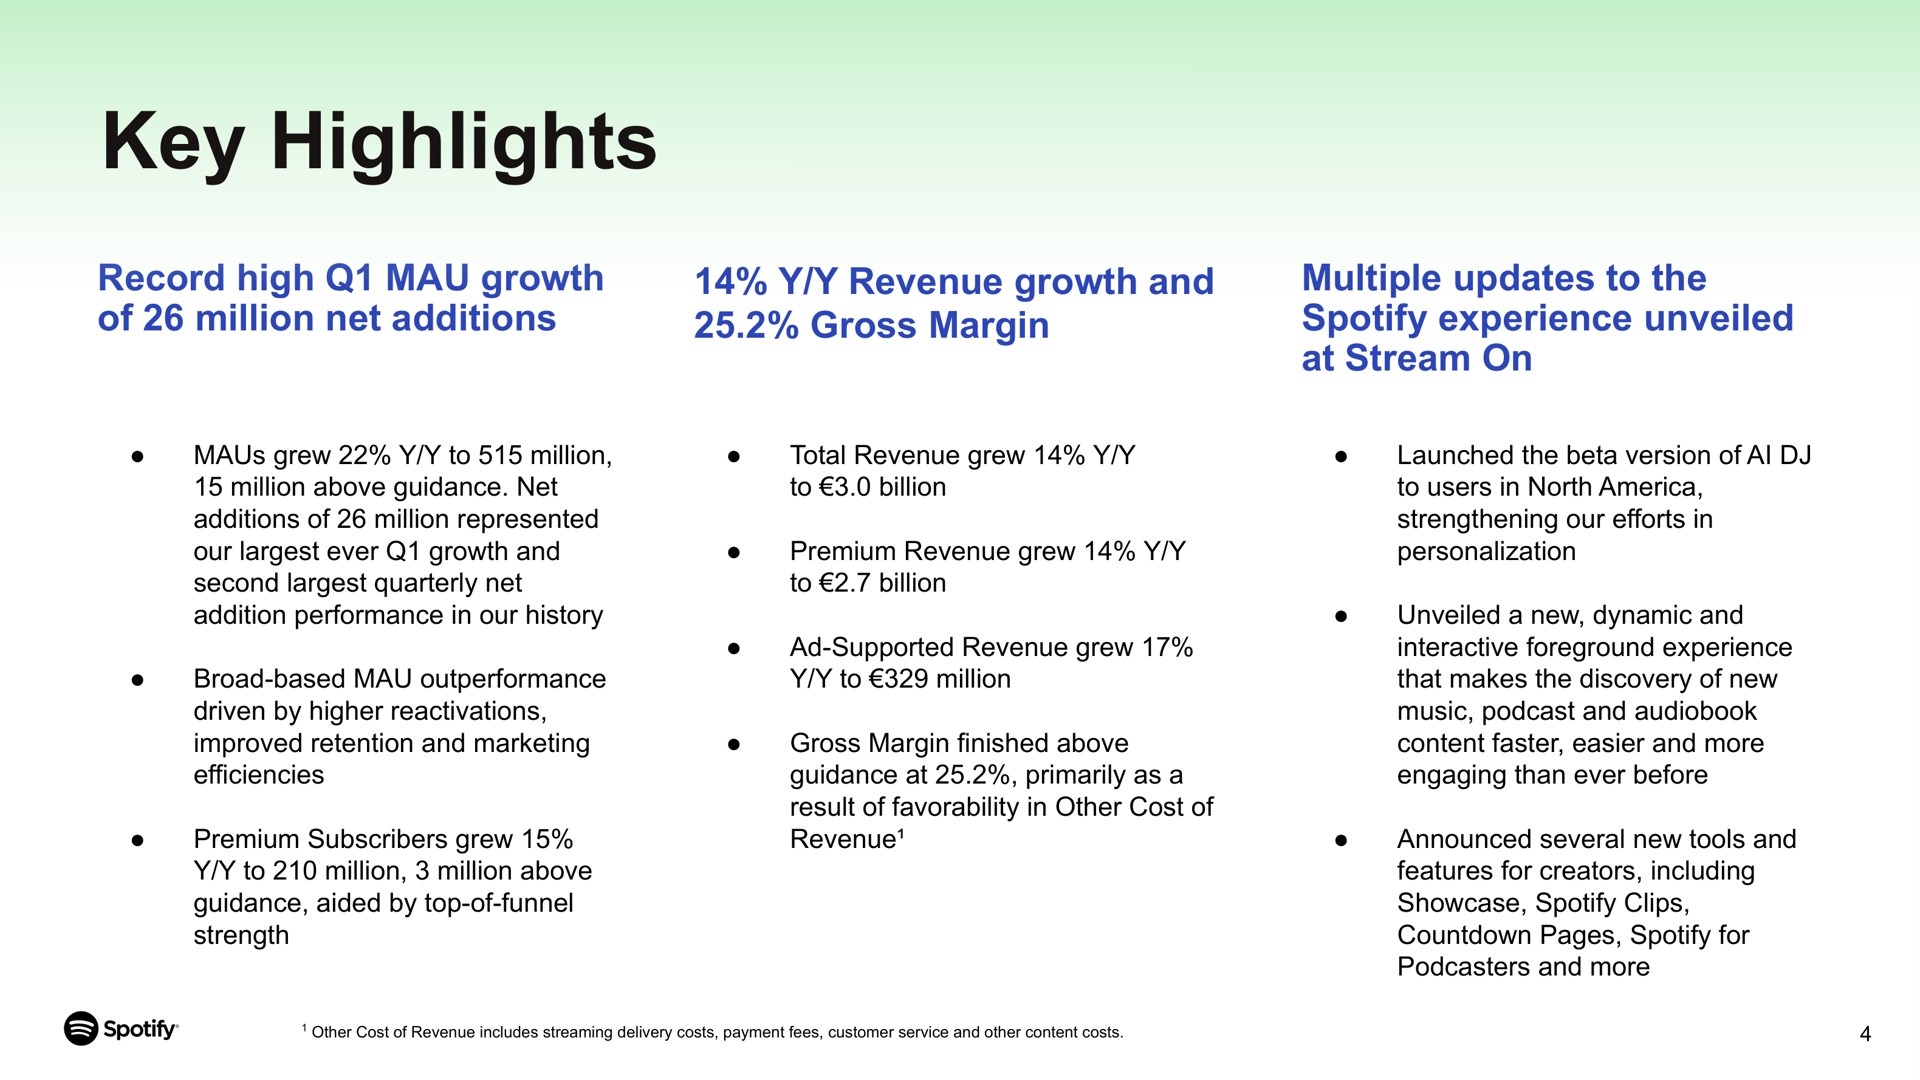 key highlights record high mau growth of million net additions revenue growth and gross margin multiple updates to the experience unveiled at stream on | Spotify